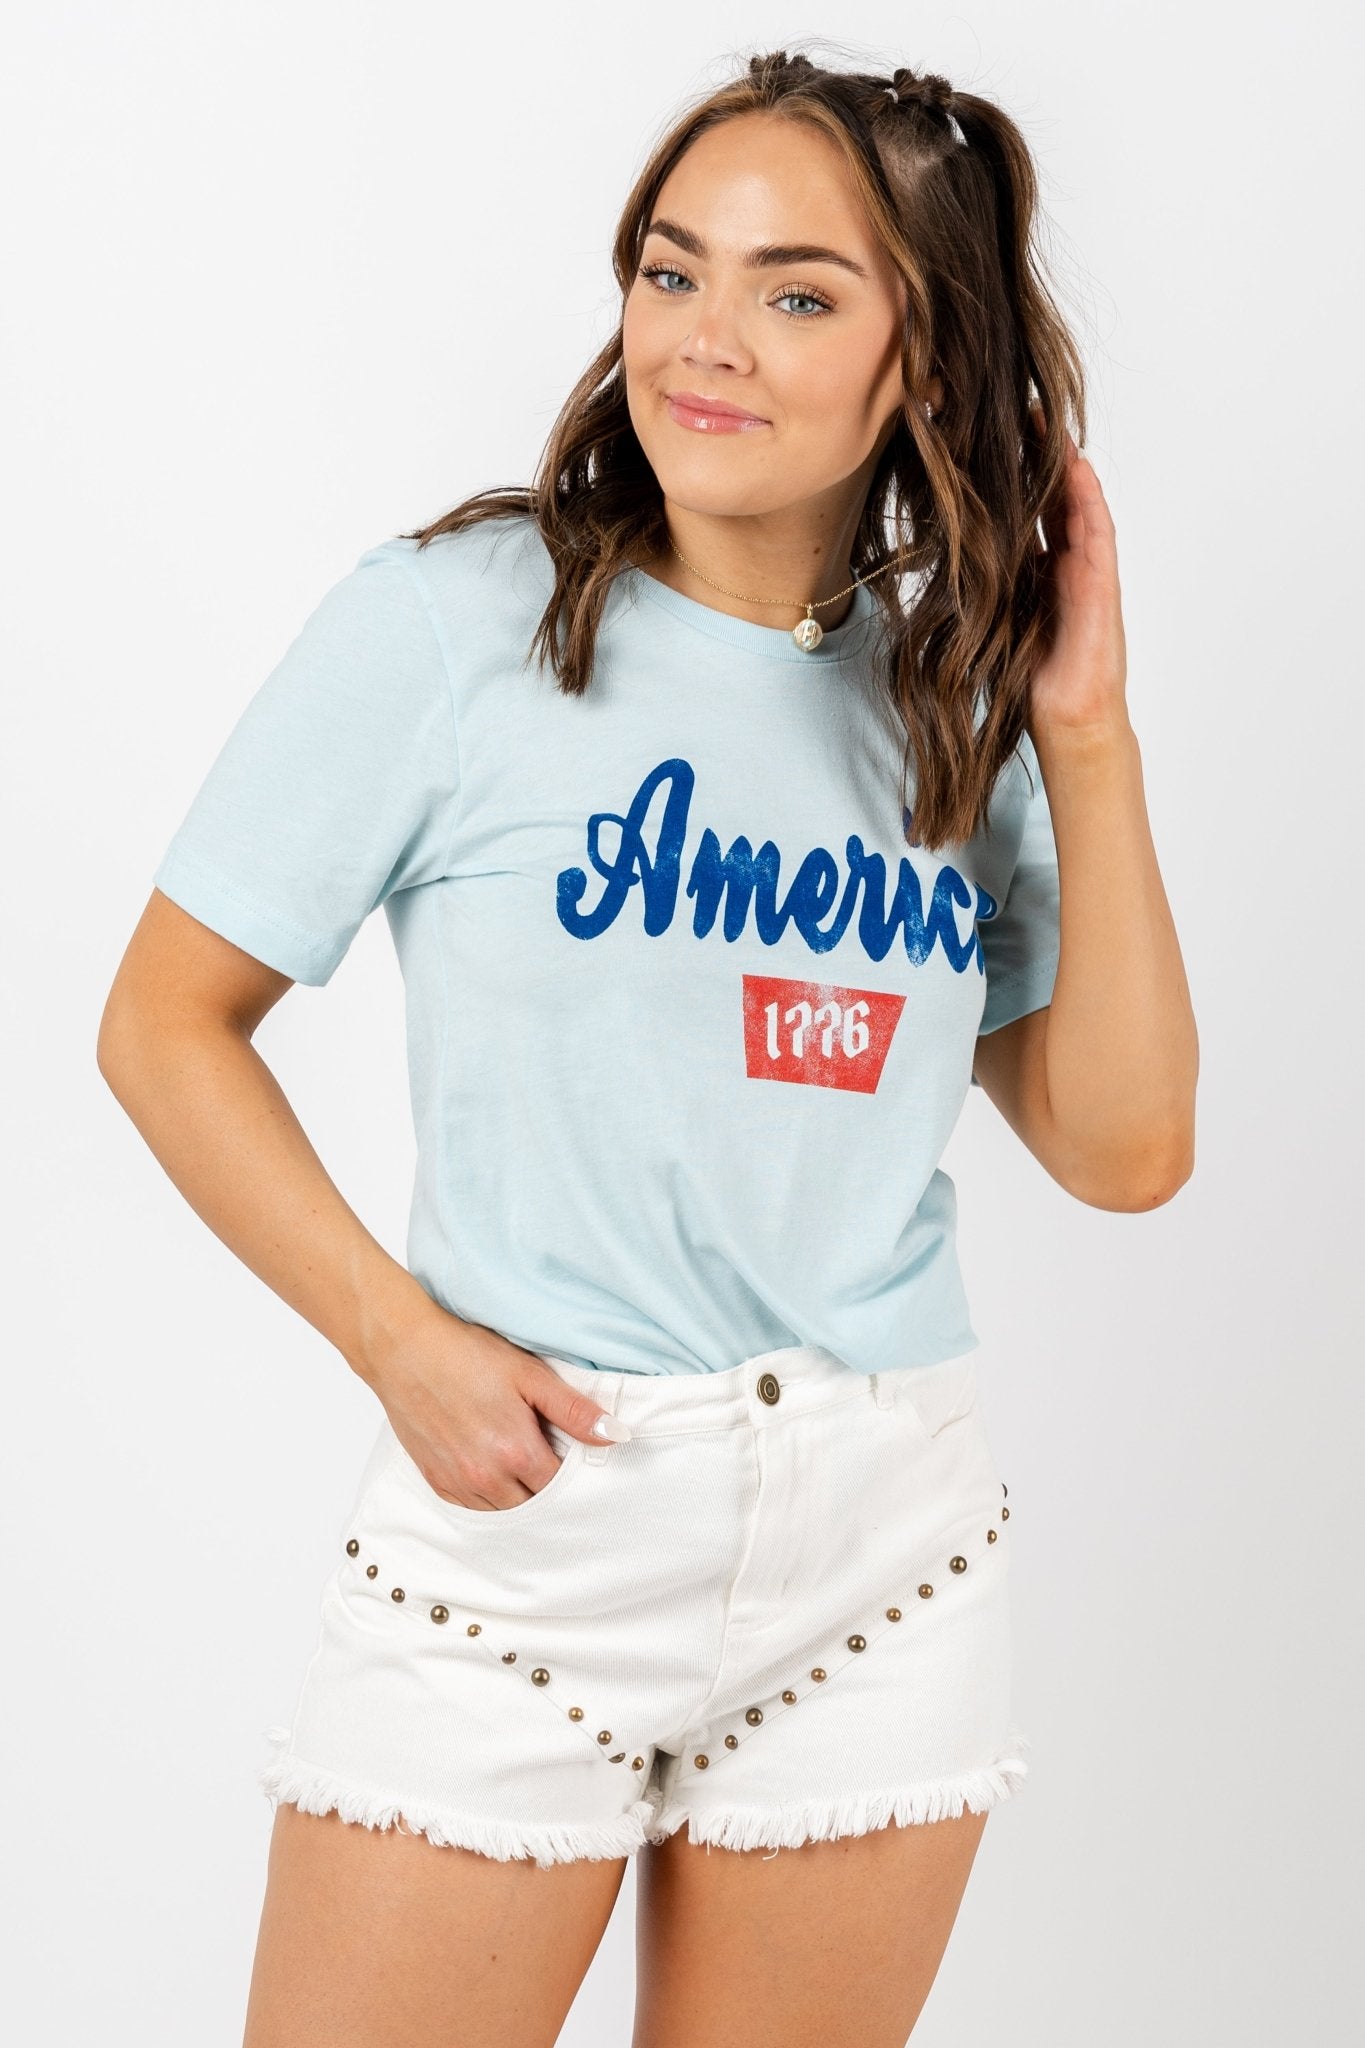 America Coors unisex t-shirt ice blue - Cute T-shirts - Fun American Summer Outfits at Lush Fashion Lounge Boutique in Oklahoma City